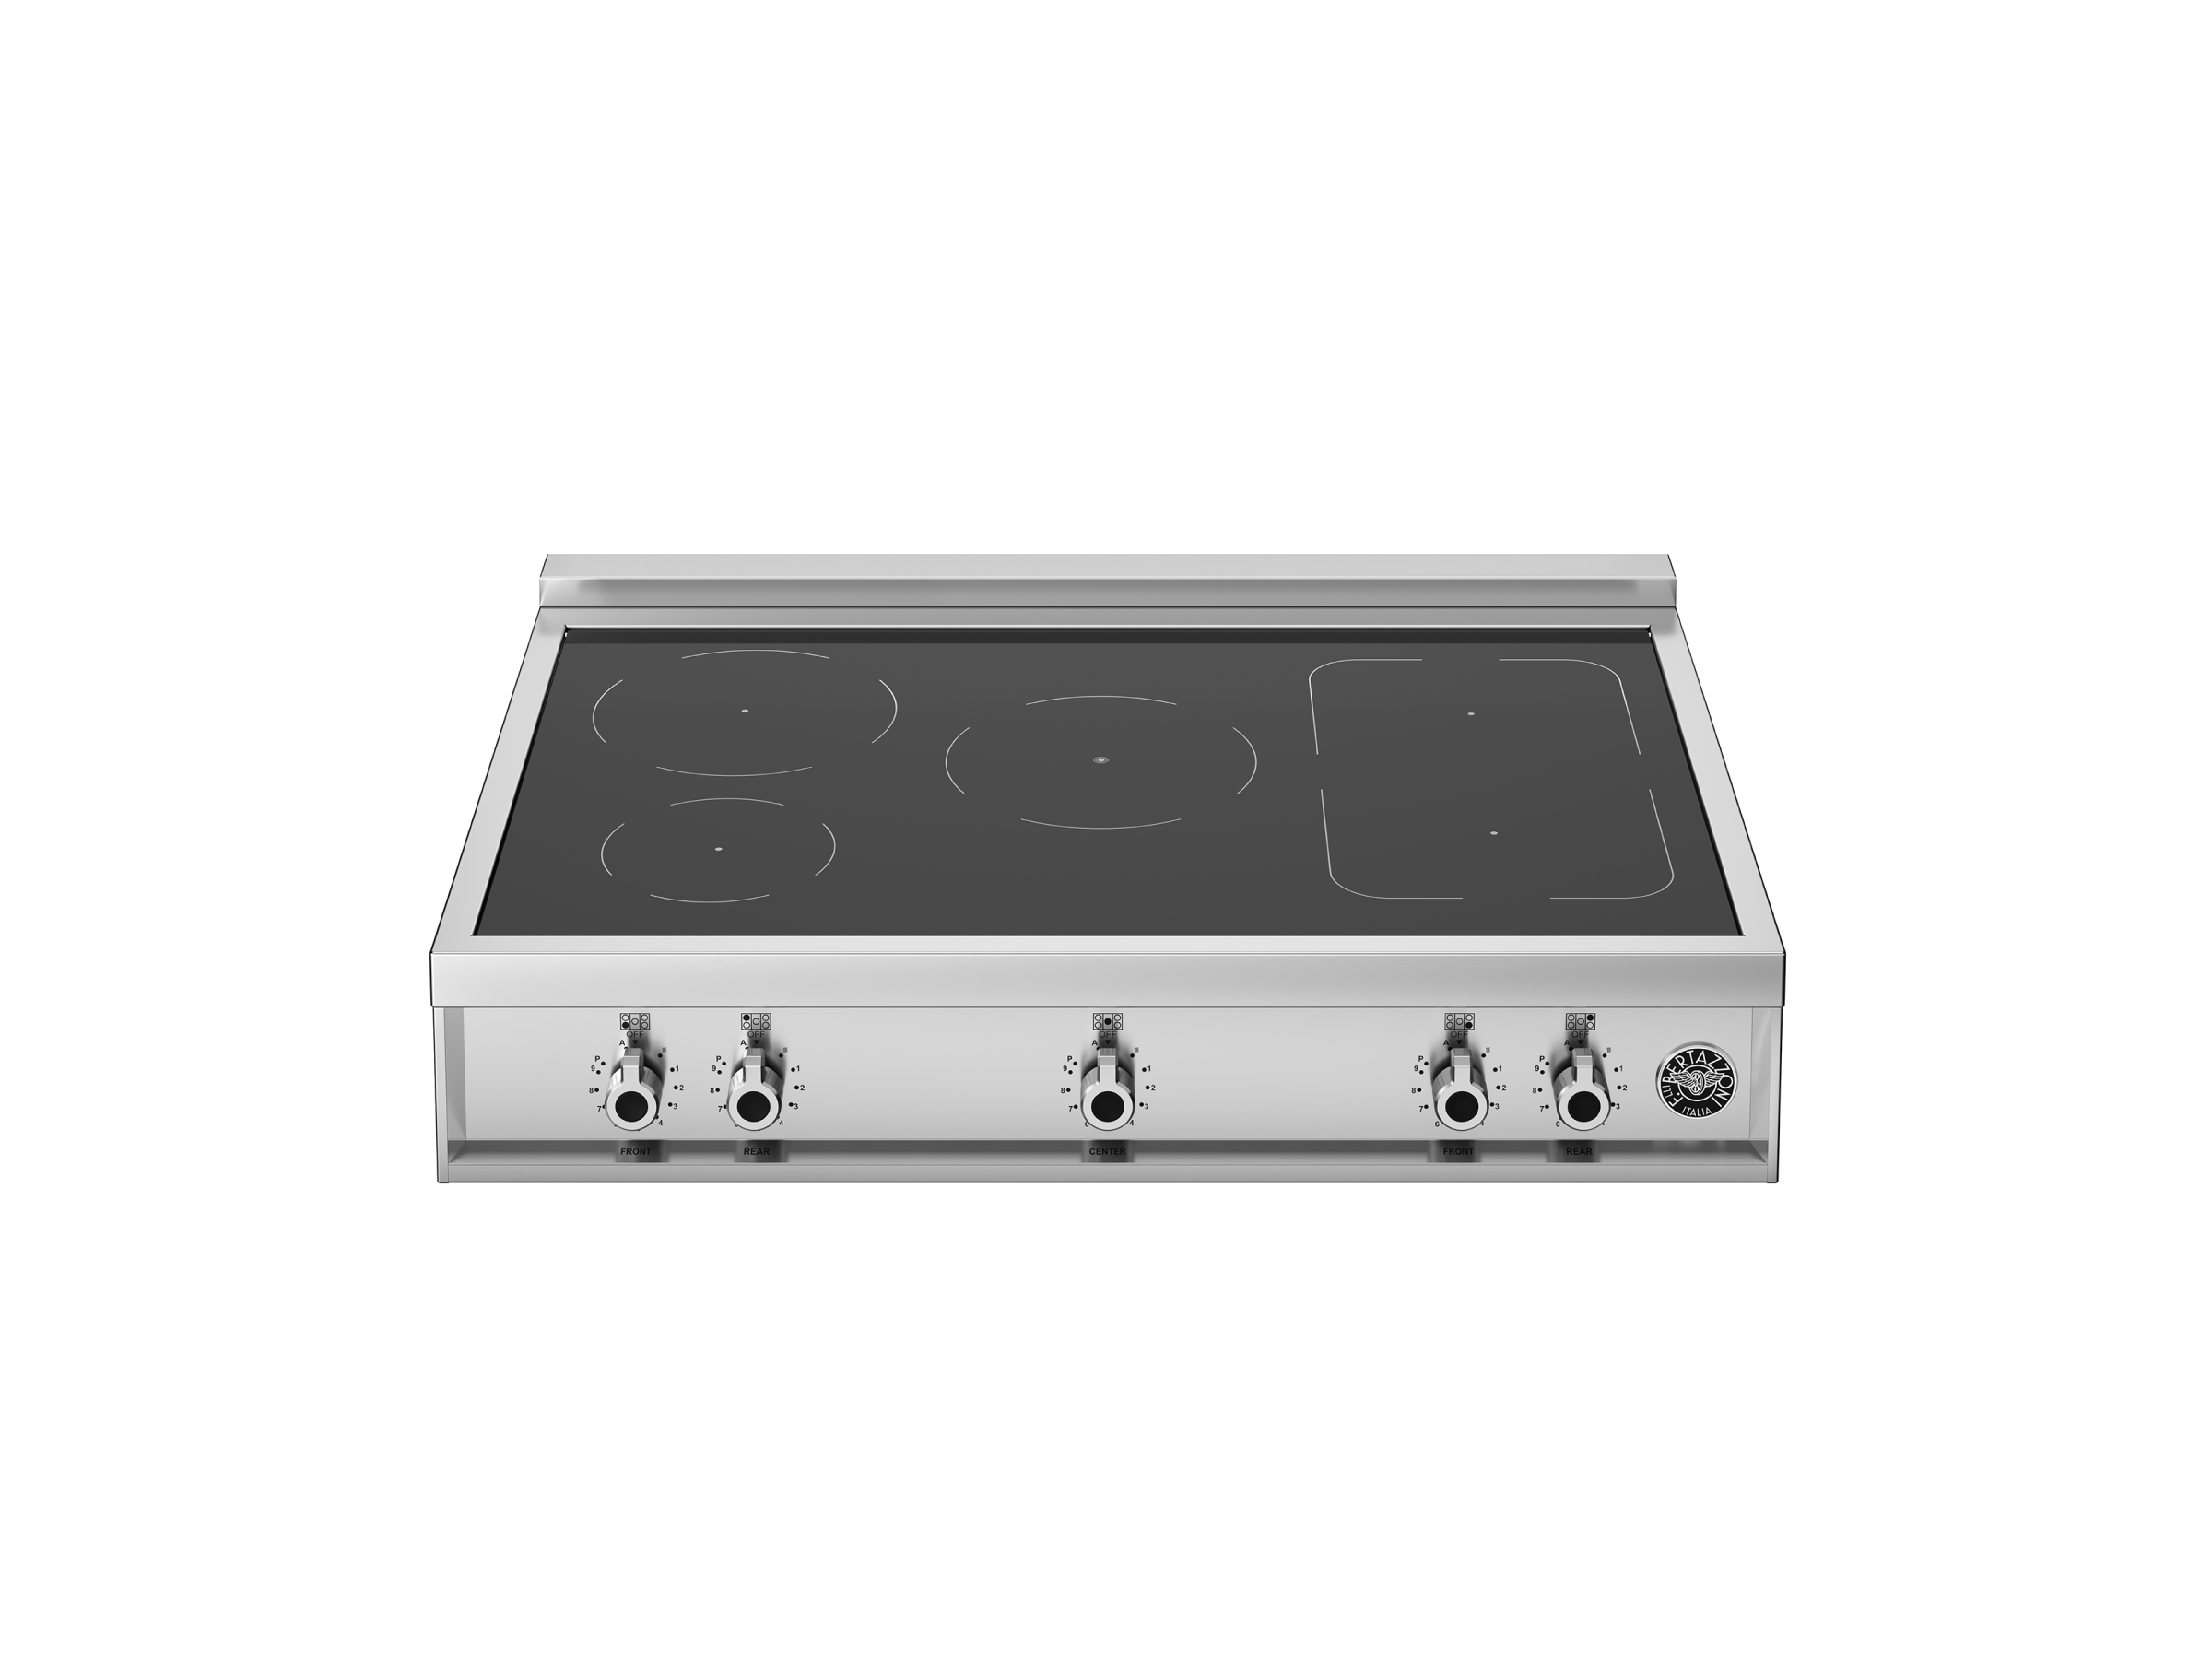 ELEKTHERMAX gas stove with 6 burners, electric oven, 2 pan support grids  and 1 griddle plate